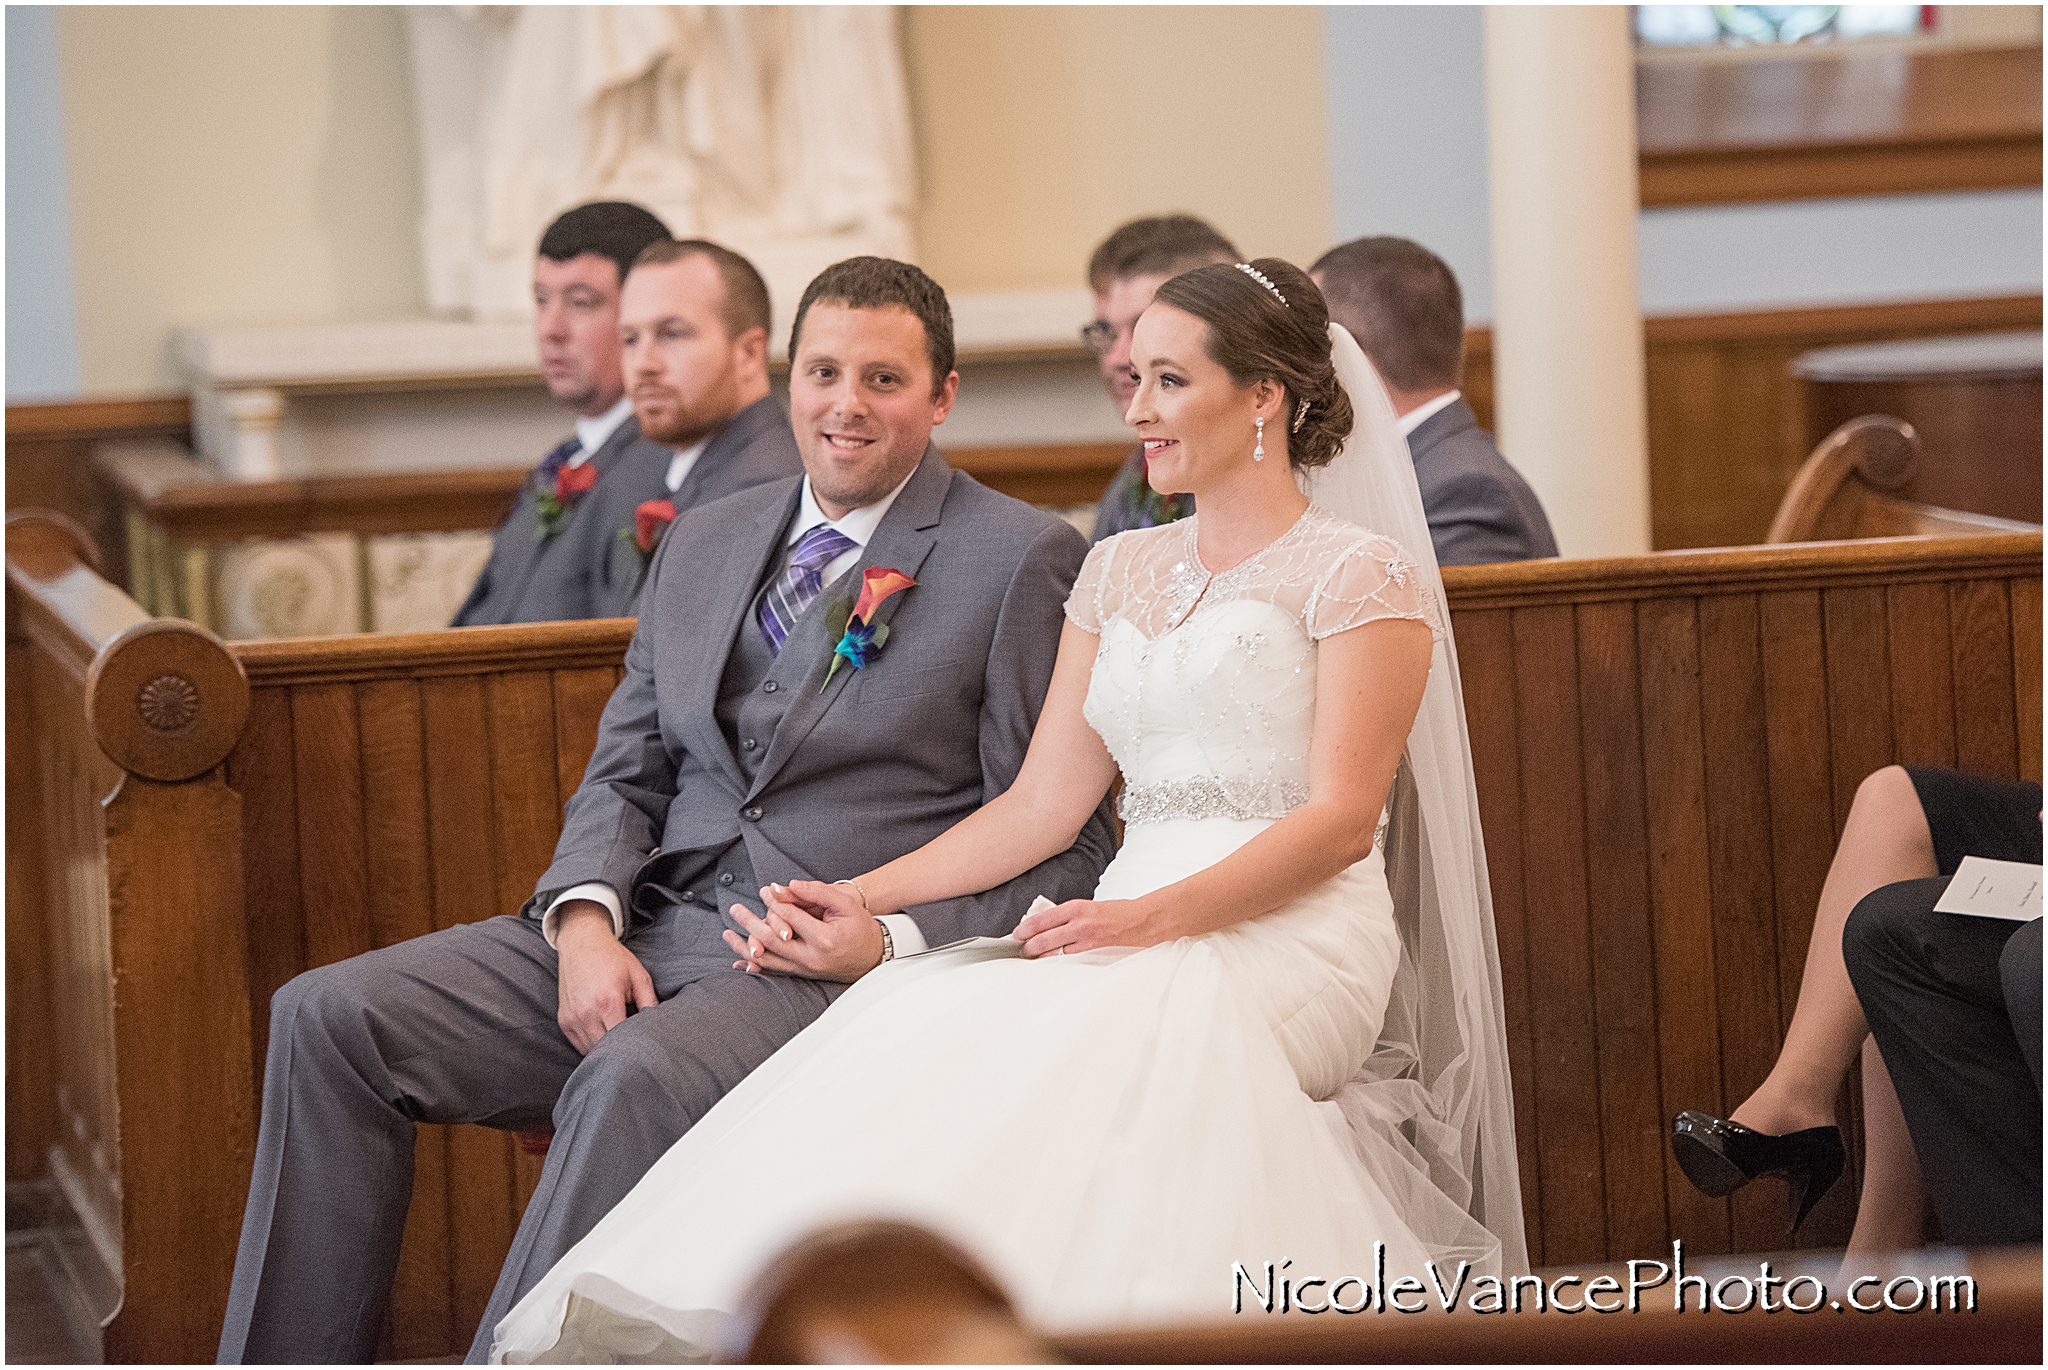 The bride and groom enjoy their wedding ceremony at St Peter's Catholic Church in Richmond, VA.